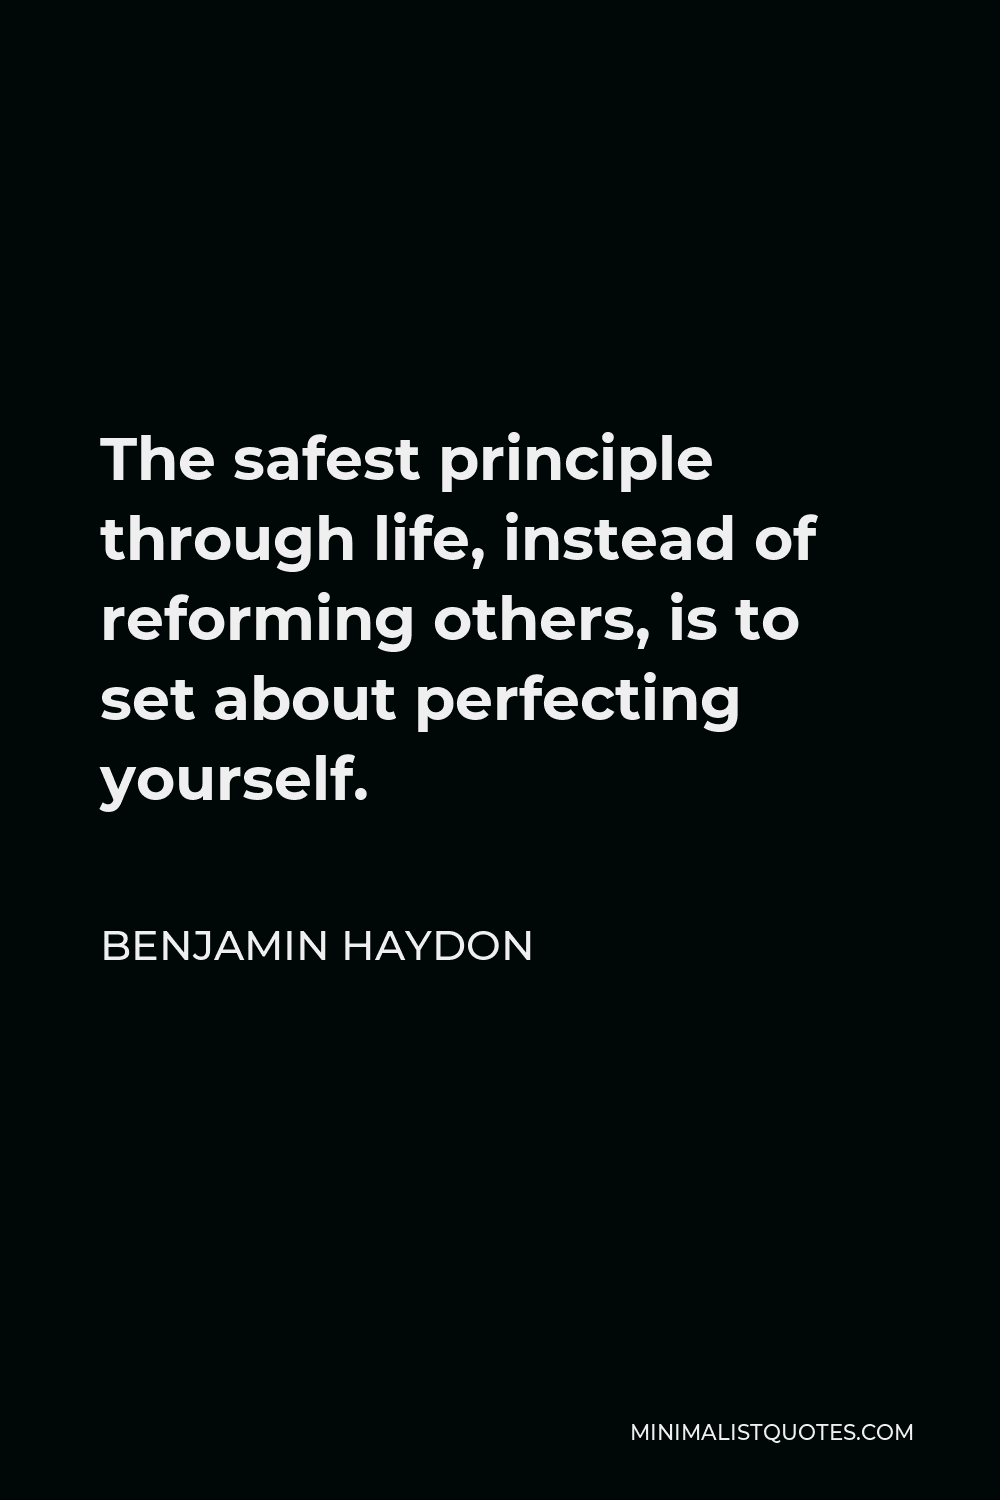 Benjamin Haydon Quote - The safest principle through life, instead of reforming others, is to set about perfecting yourself.